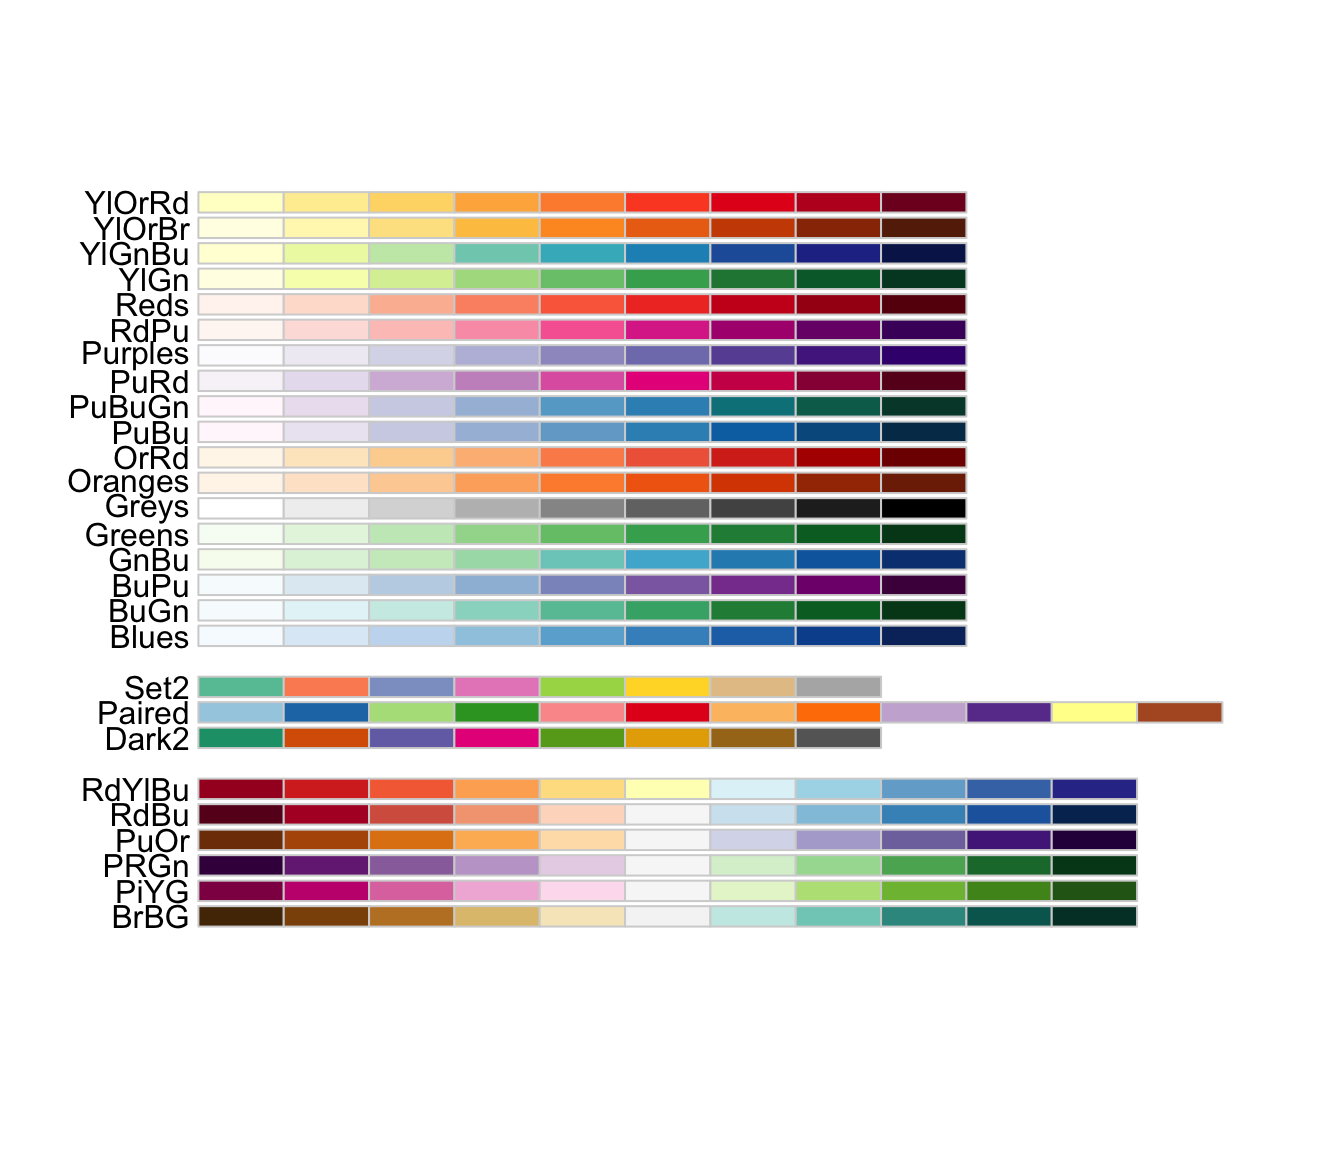 Much like before, this is another list of names of colour palettes, which are still concatenated abbreviations of shortened colour names or a small descriptor. The names are yet again accompanied by a series of wide rectangles coloured in according to the palette.